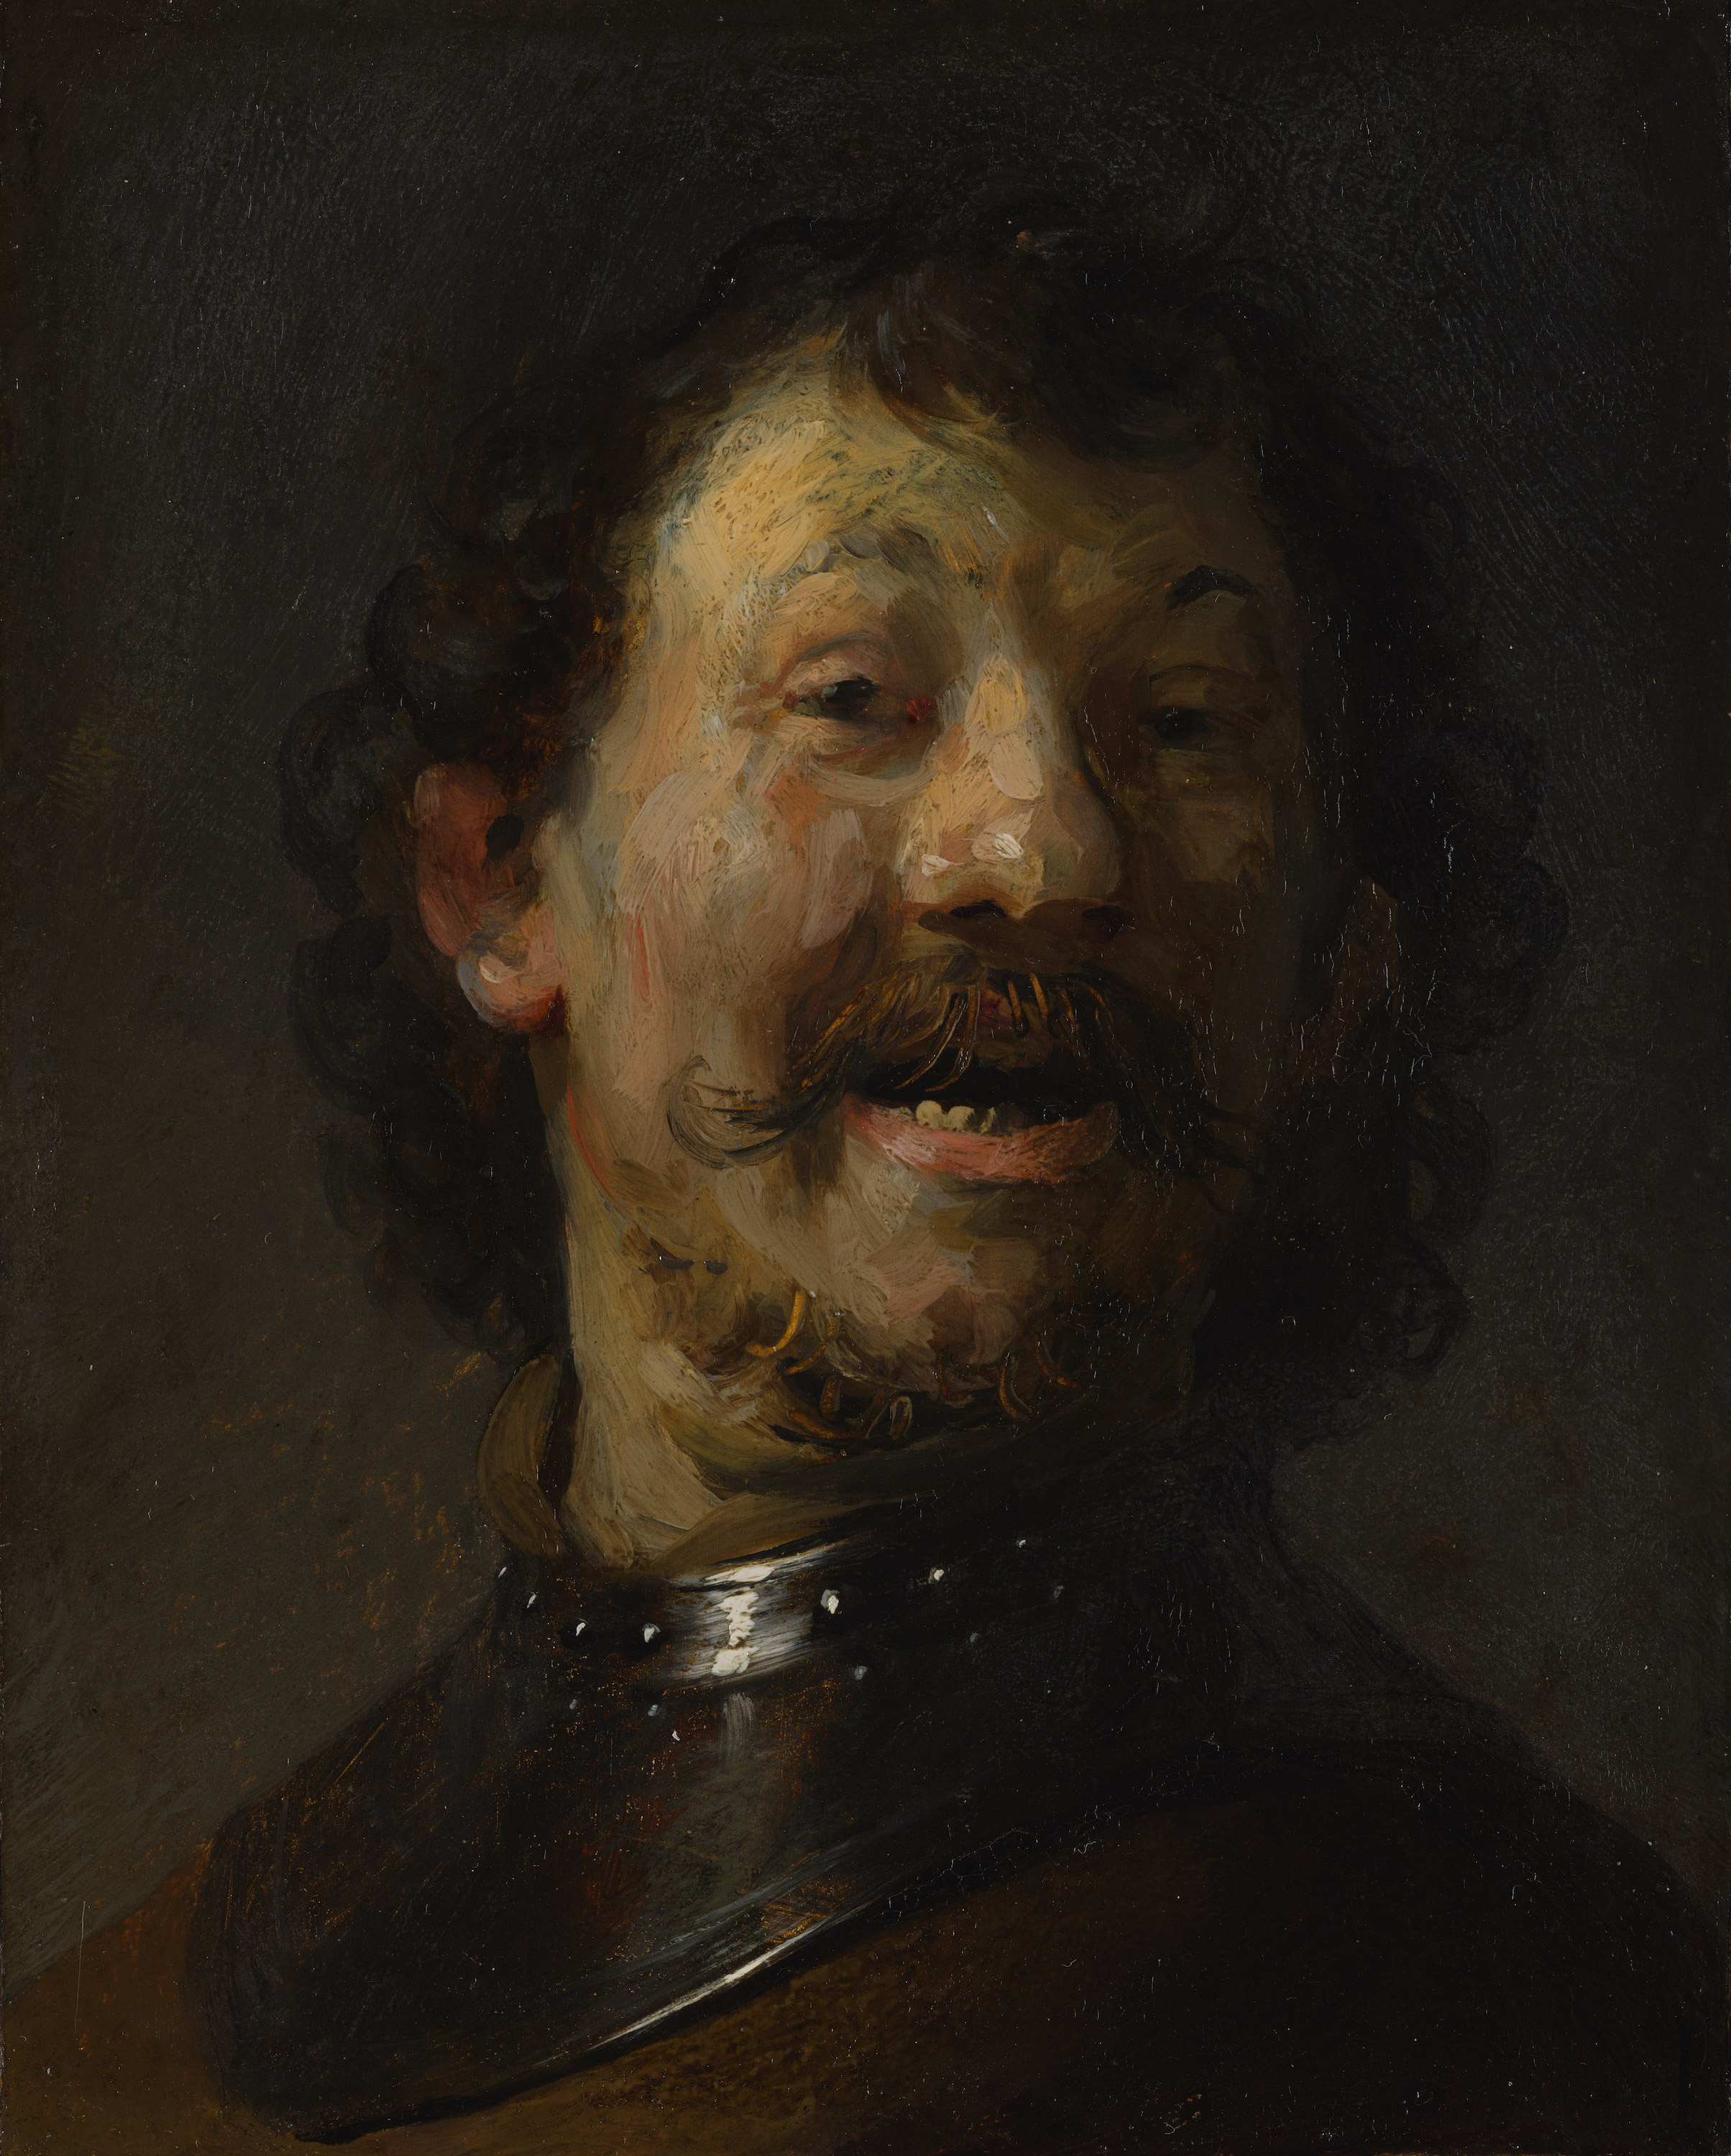 The Laughing Man by Rembrandt van Rijn - c. 1629 - 1630 - 15.3 x 12.2 cm Mauritshuis, The Hague